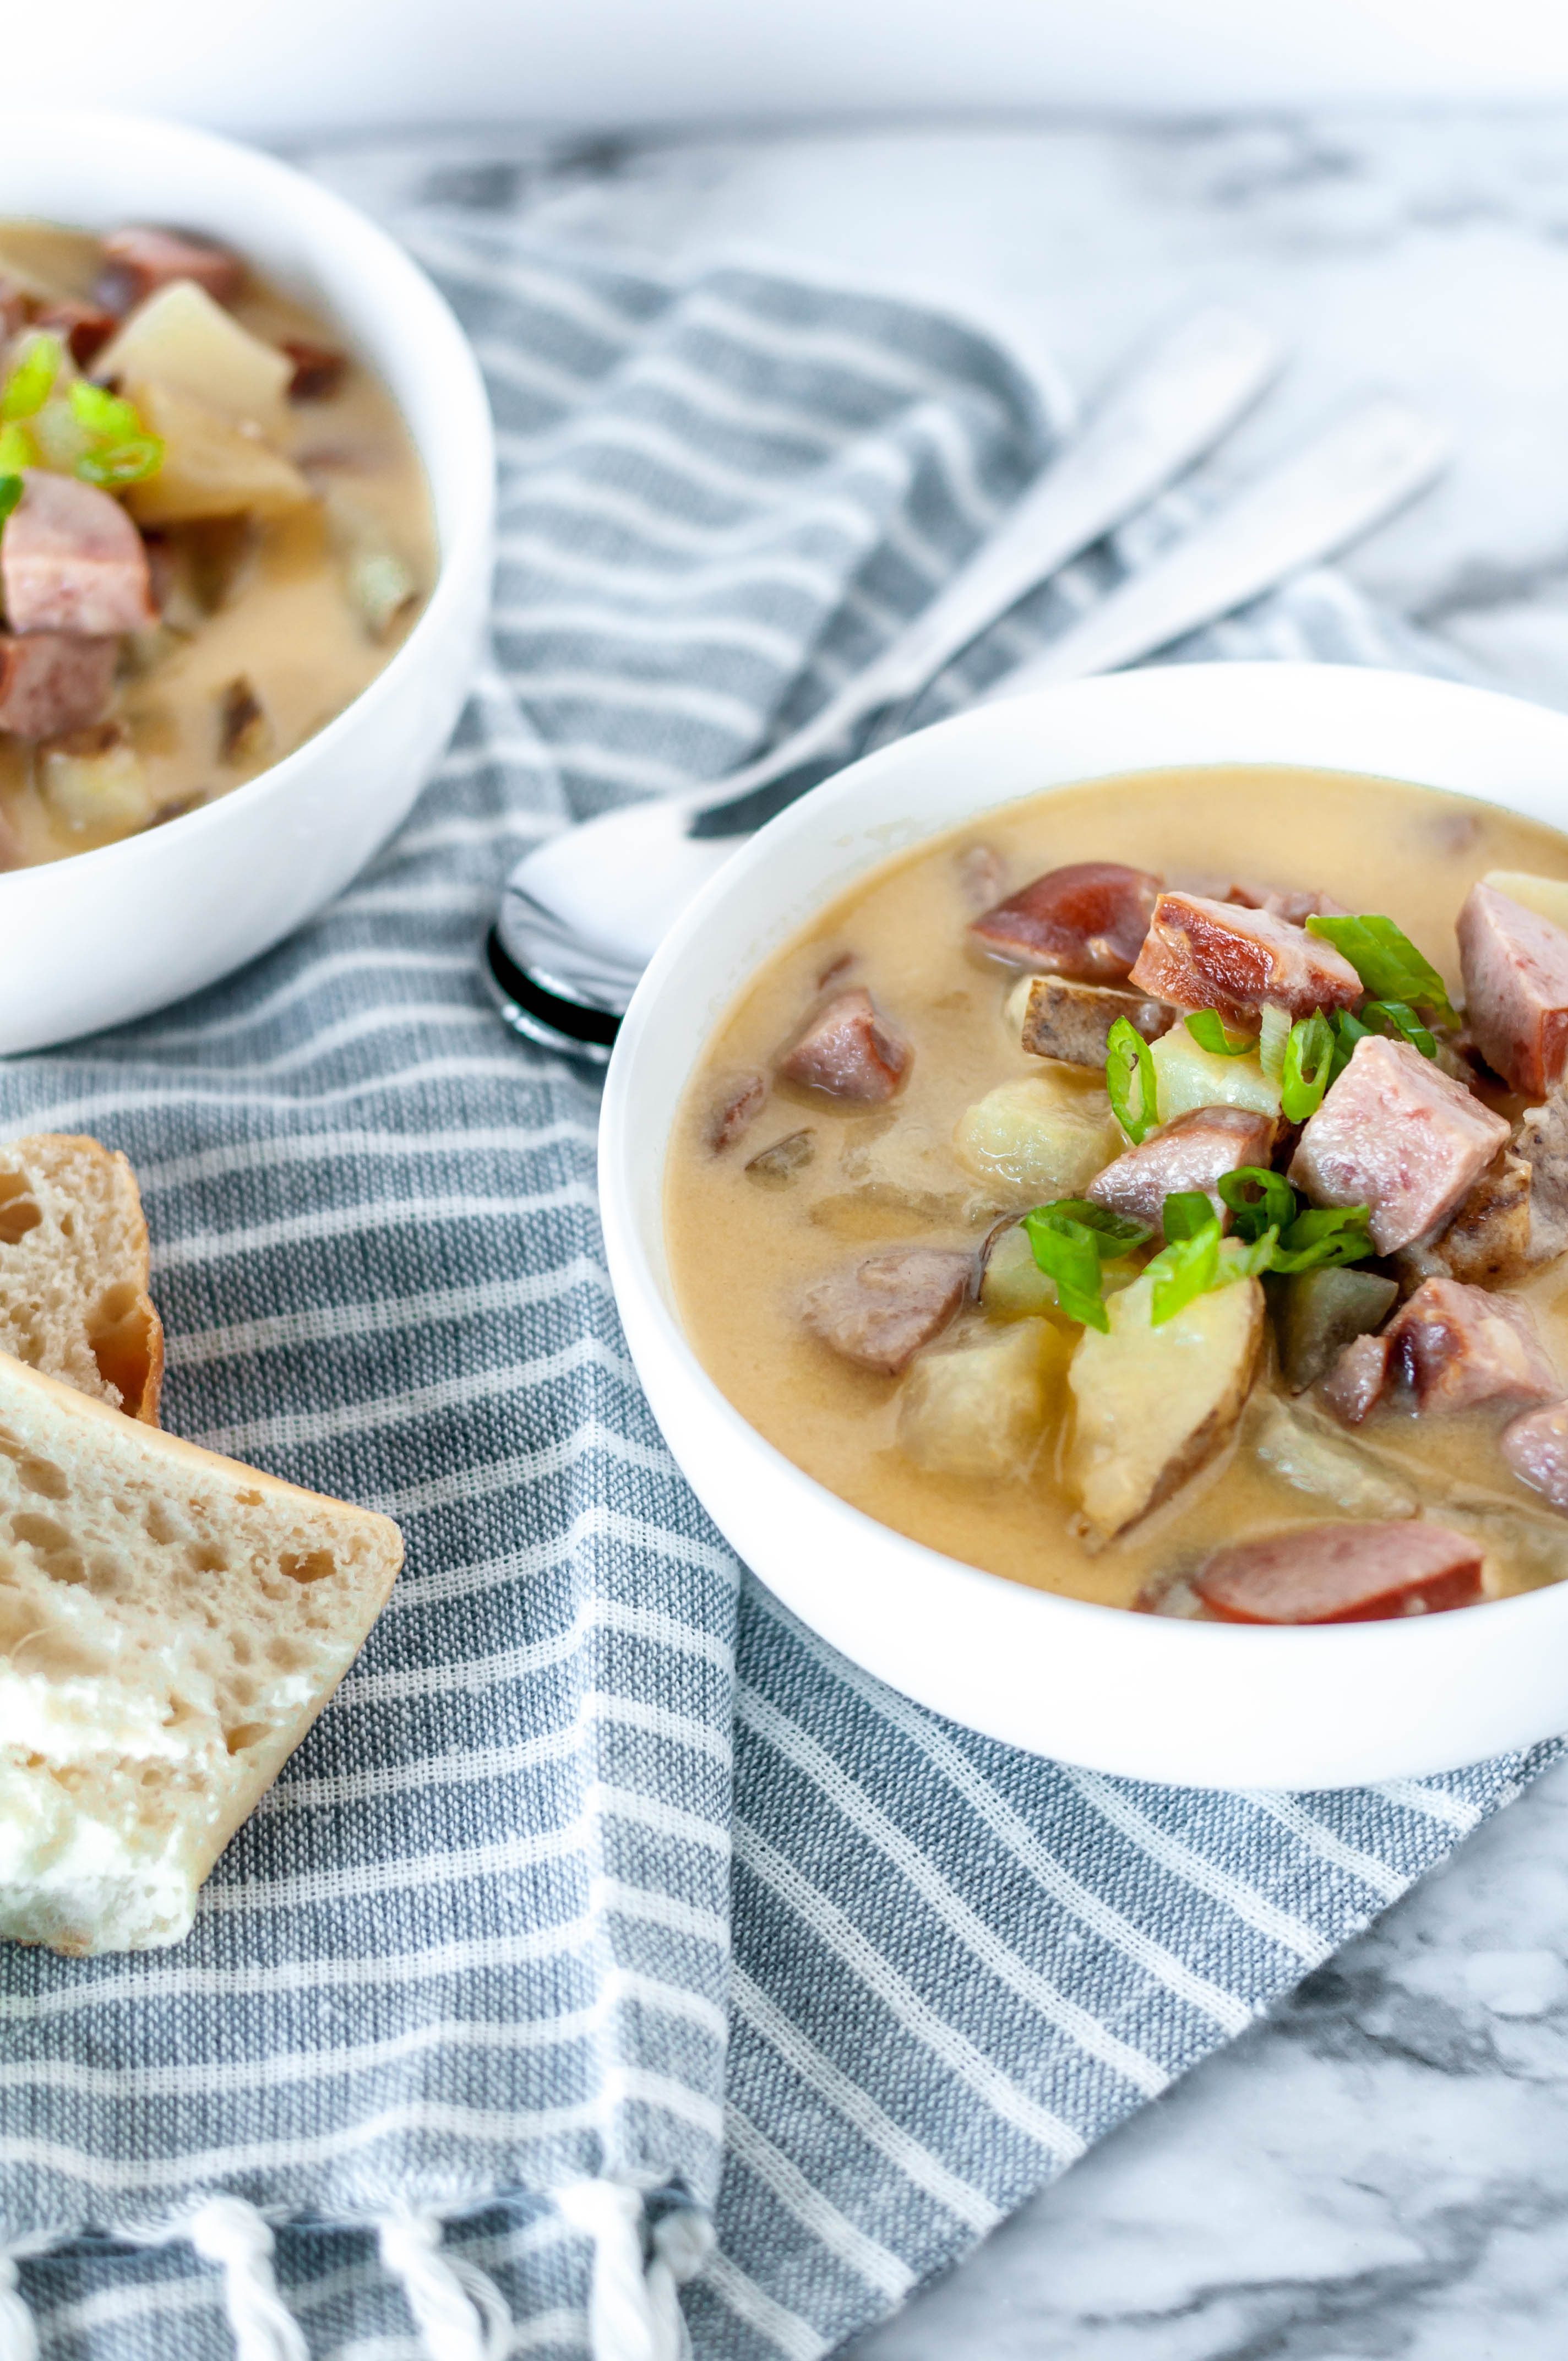 Cheesy Sausage Potato Soup is just what you need this winter. Soft potatoes, flavorful smoked sausage in a cheesy broth makes an easy weeknight meal.